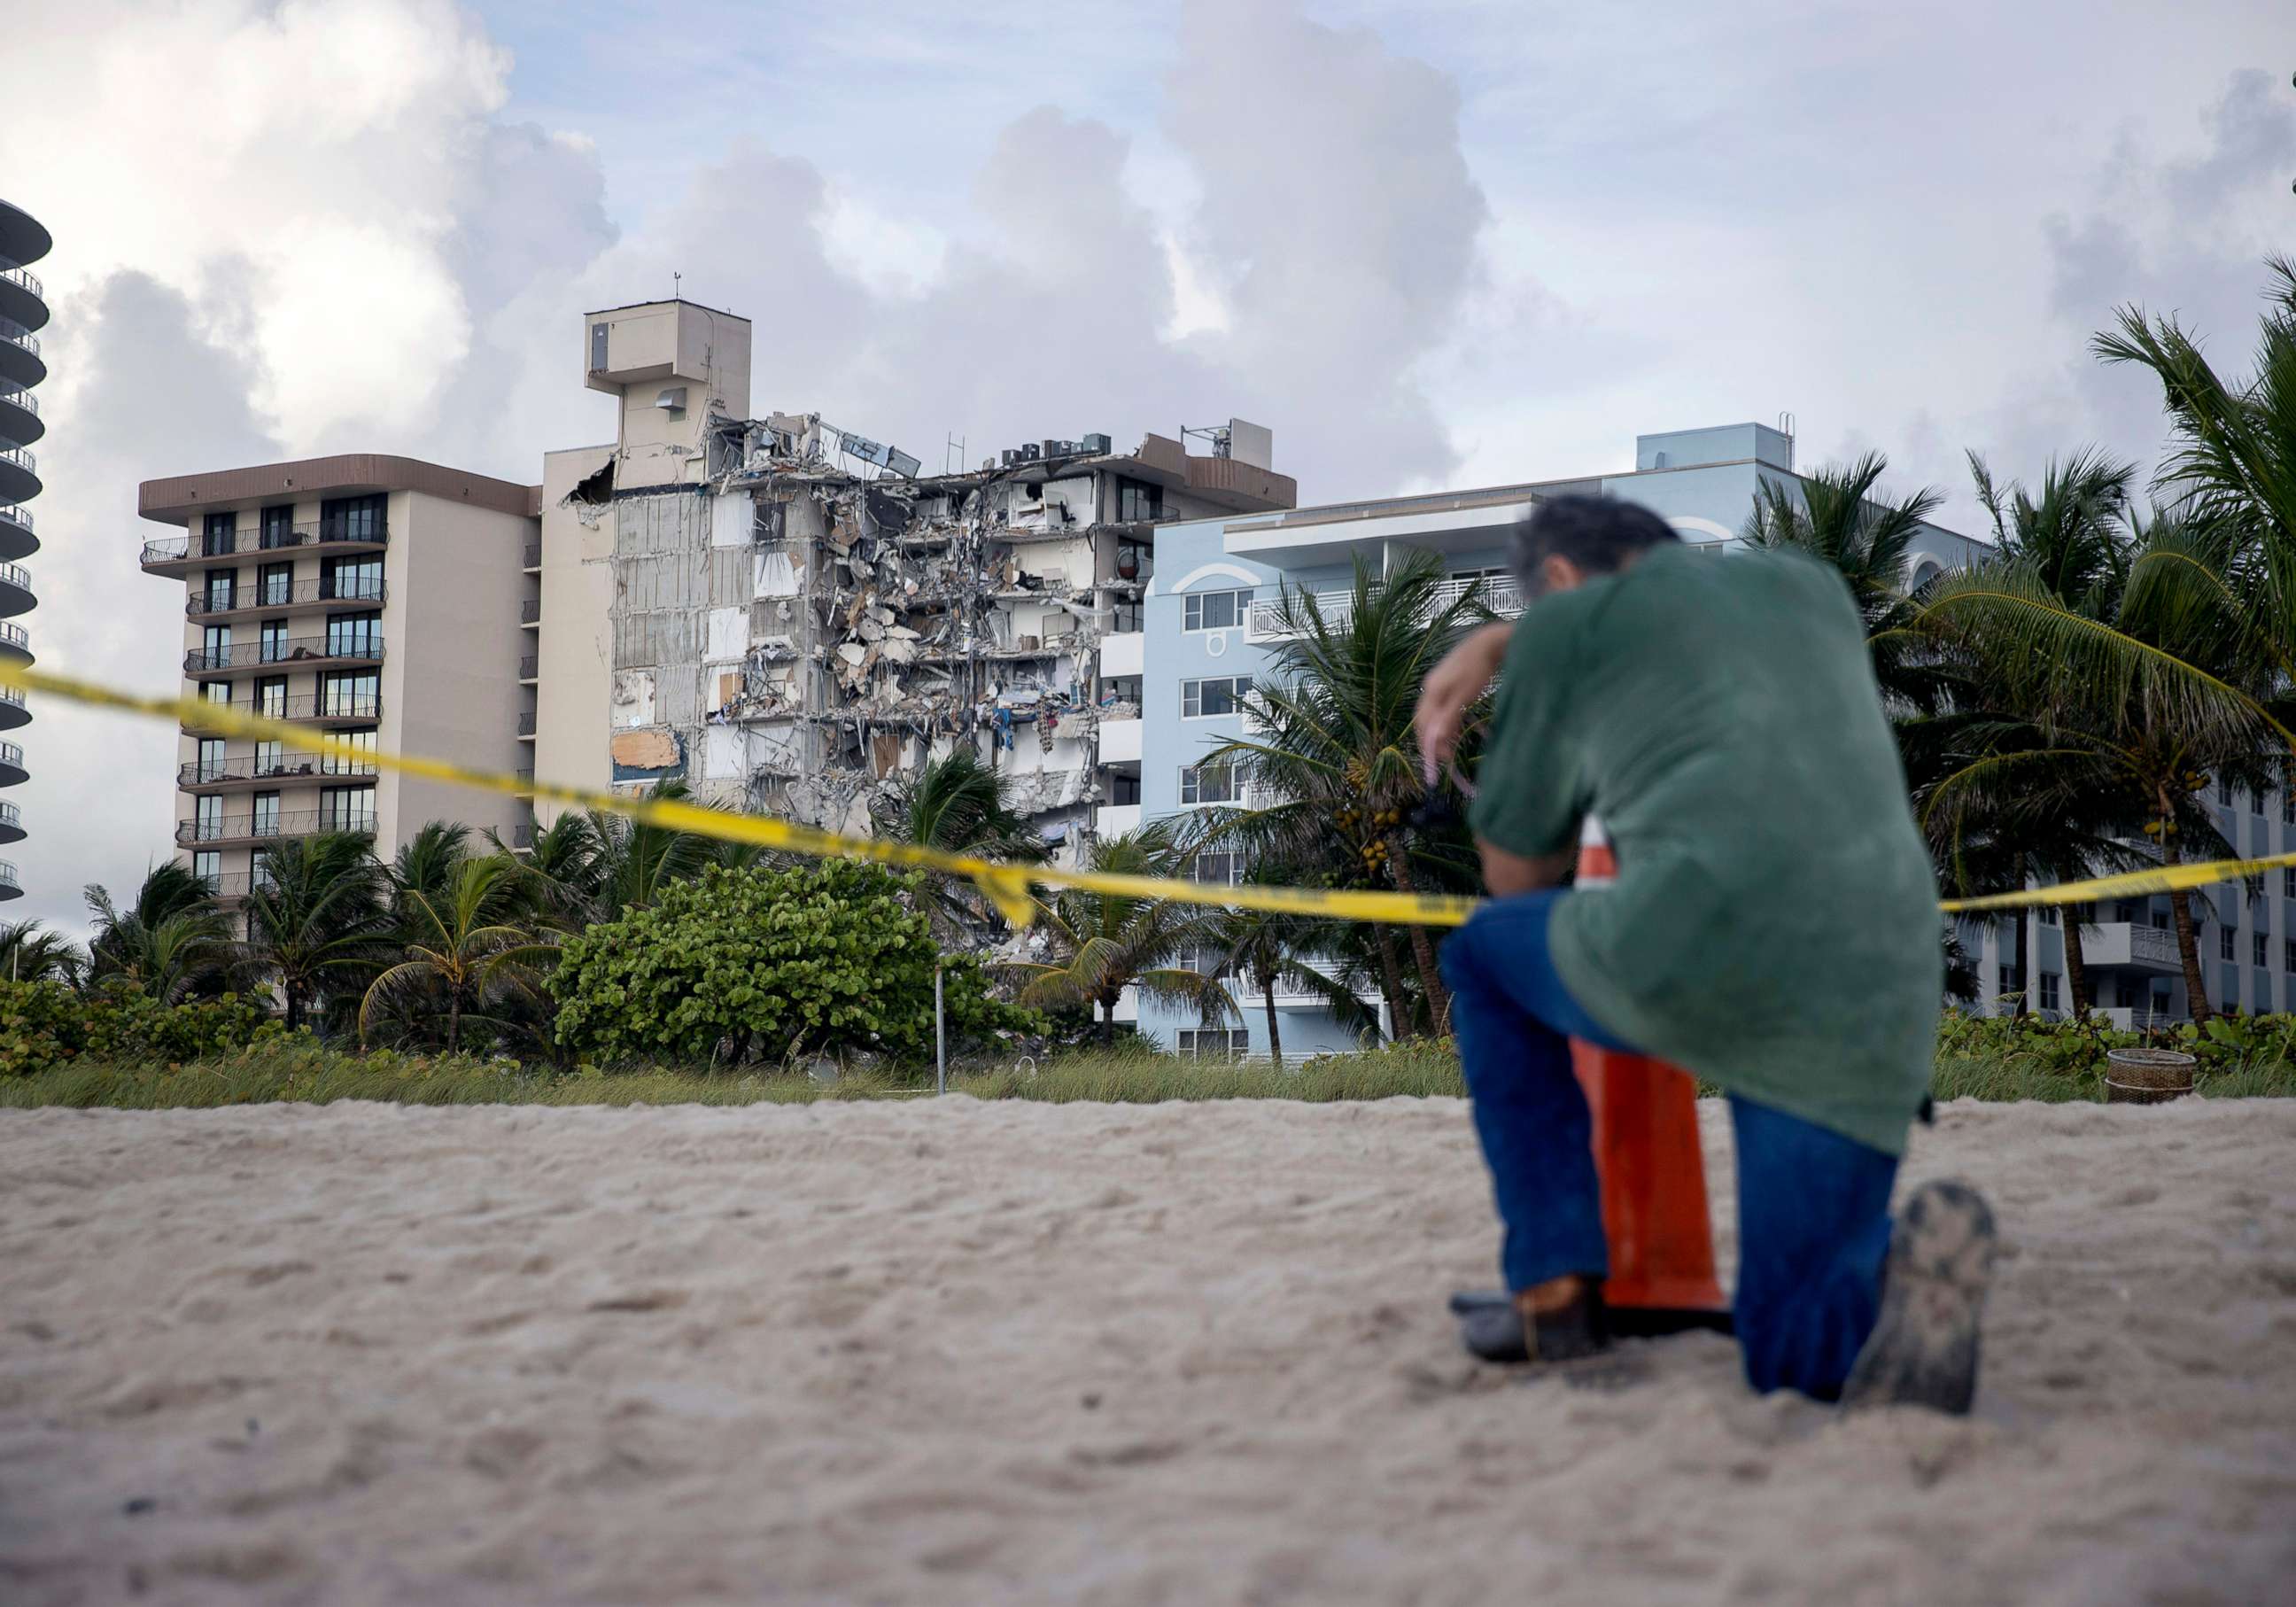 PHOTO: A man prays near where search and rescue operations continue at the site of the partially collapsed 12-story Champlain Towers South condo building, June 25, 2021, in Surfside, Fla., near Miami Beach.